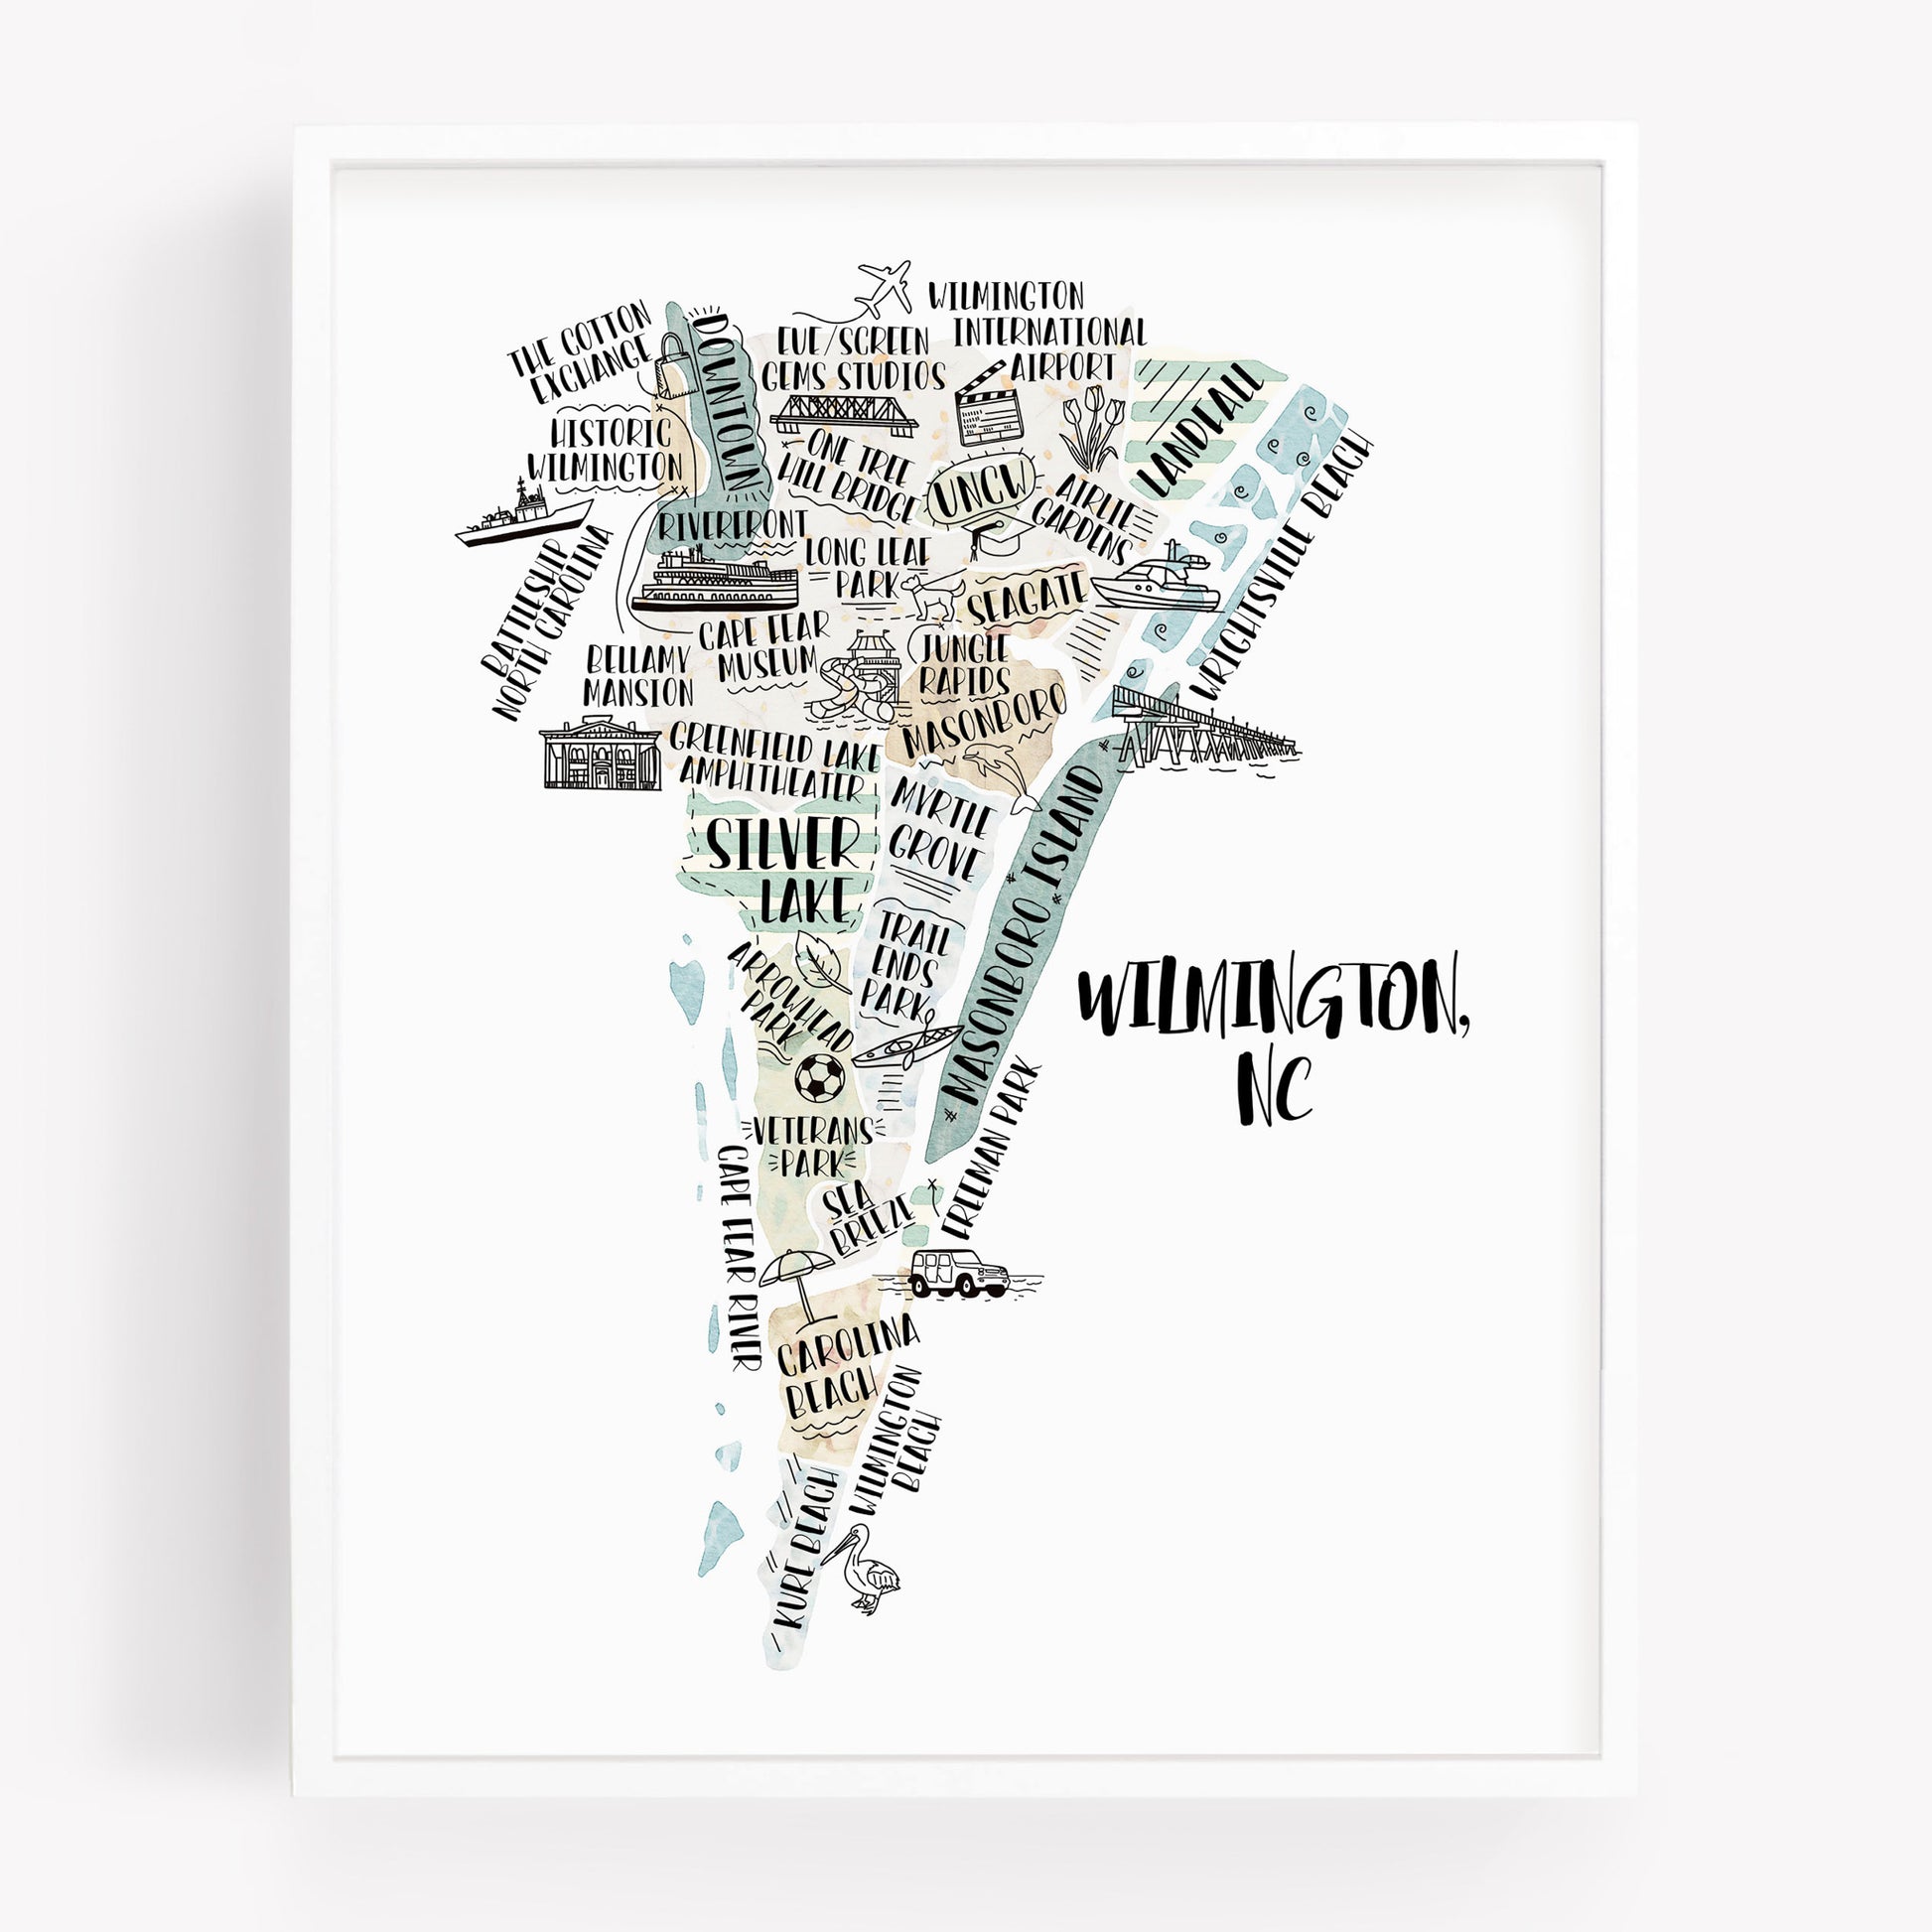 An illustrated map of Wilmington North Carolina, as a print, in the color beige